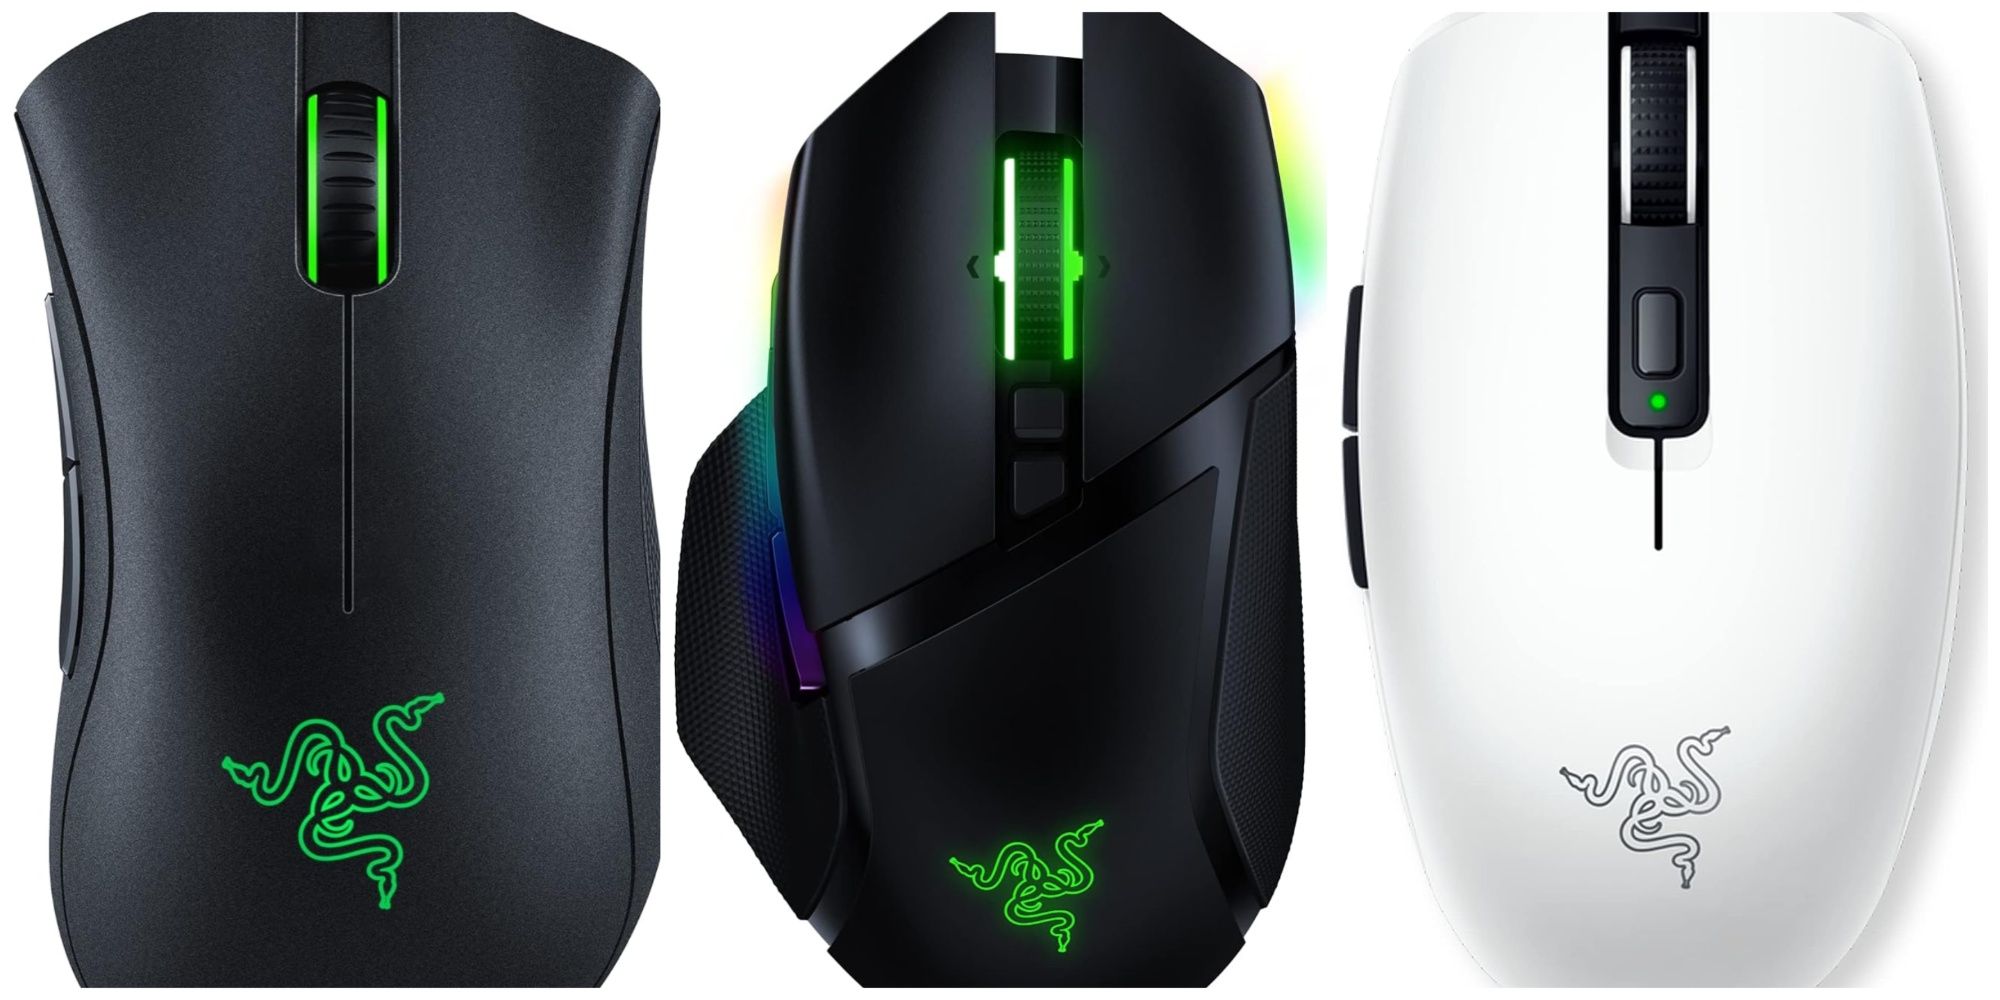 Three Razer mice aranged in a line: The DeathAdder, the Basilisk, and the Orochi.